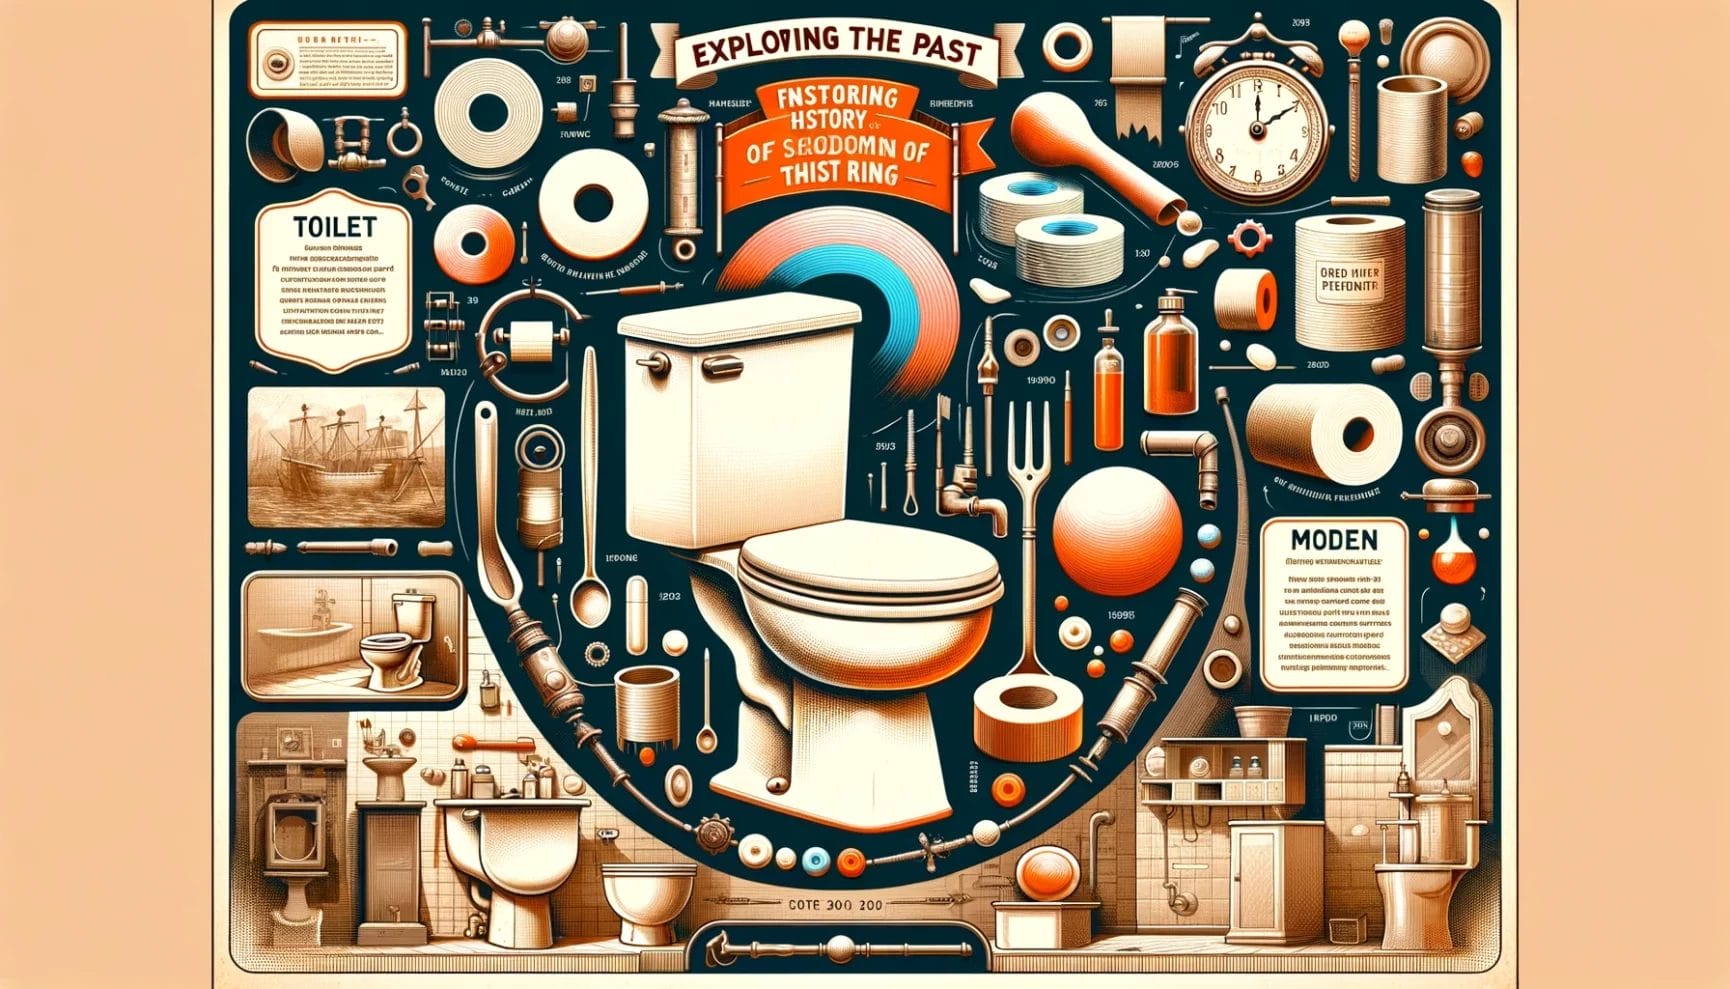 Infographic poster illustrating the history and technology of flushing toilets.